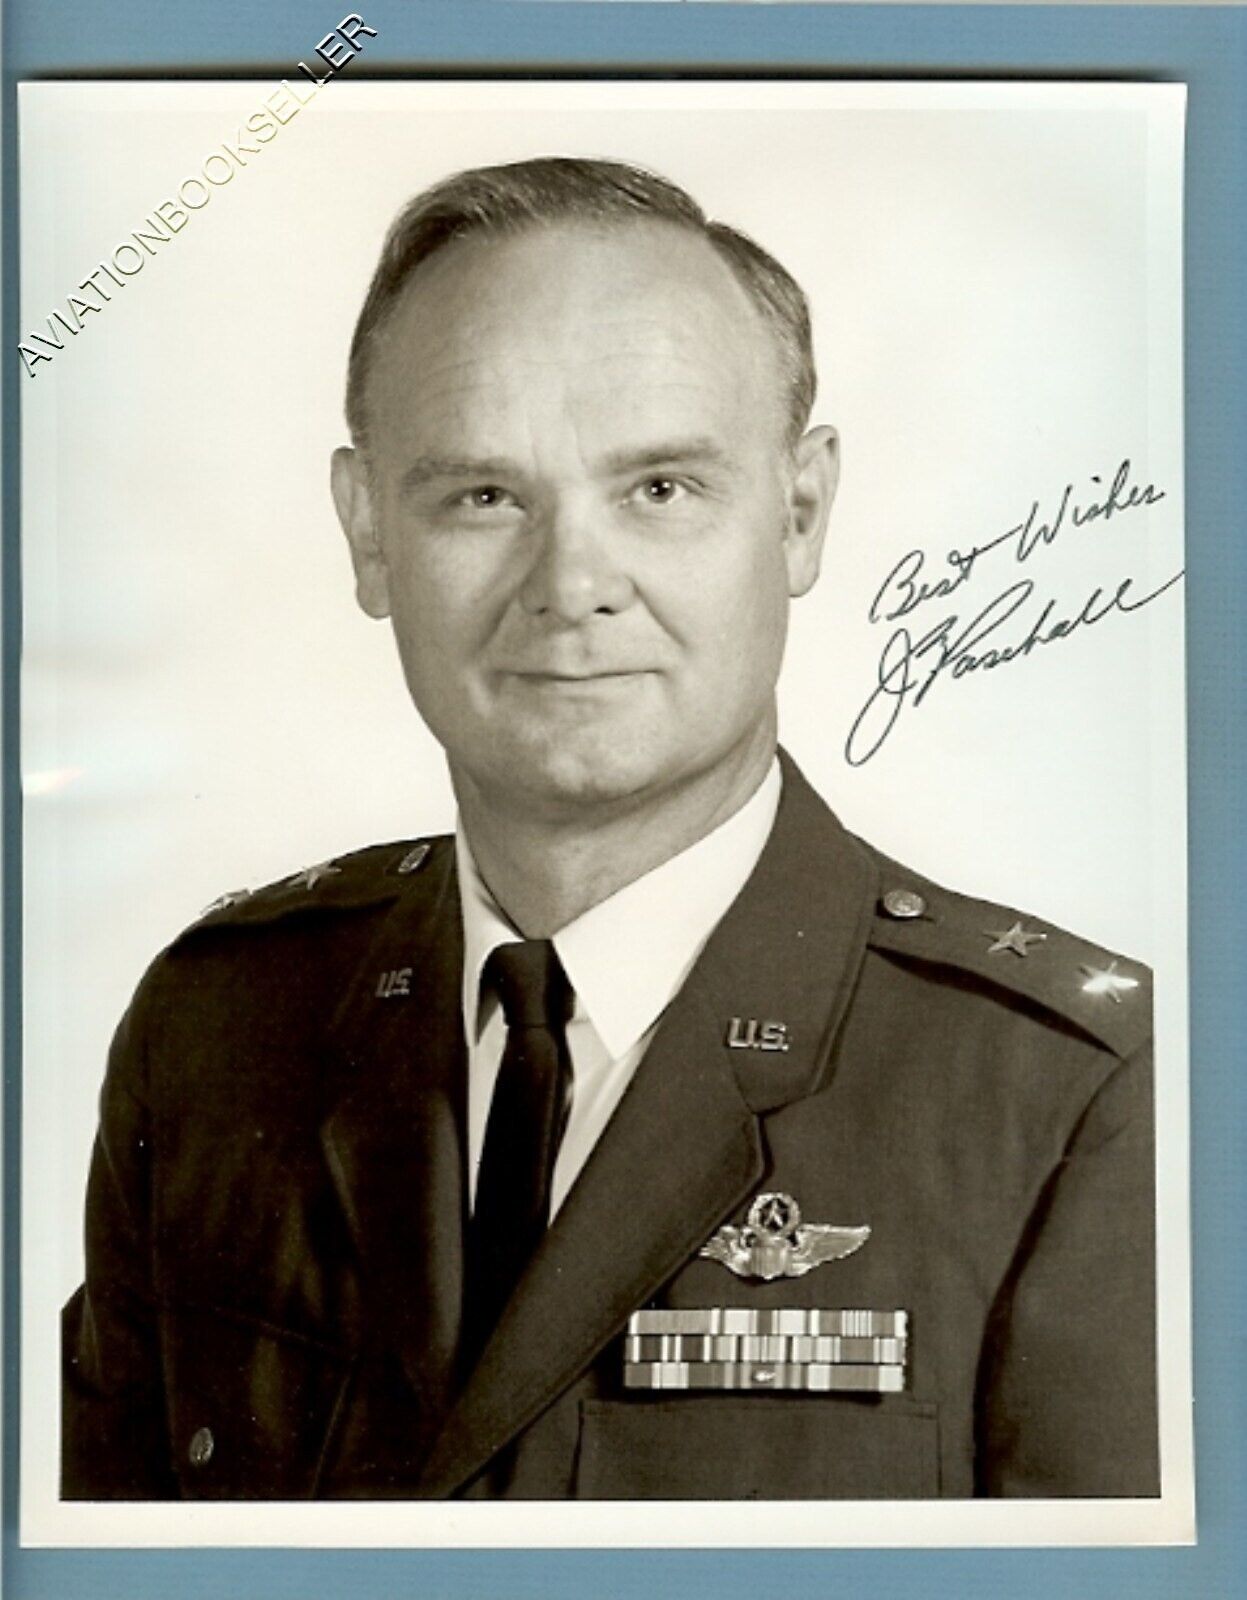 MG J. E. Paschal: CO OF THE USAF SPECIAL WEAPONS CENTER, SIGNED LETTER